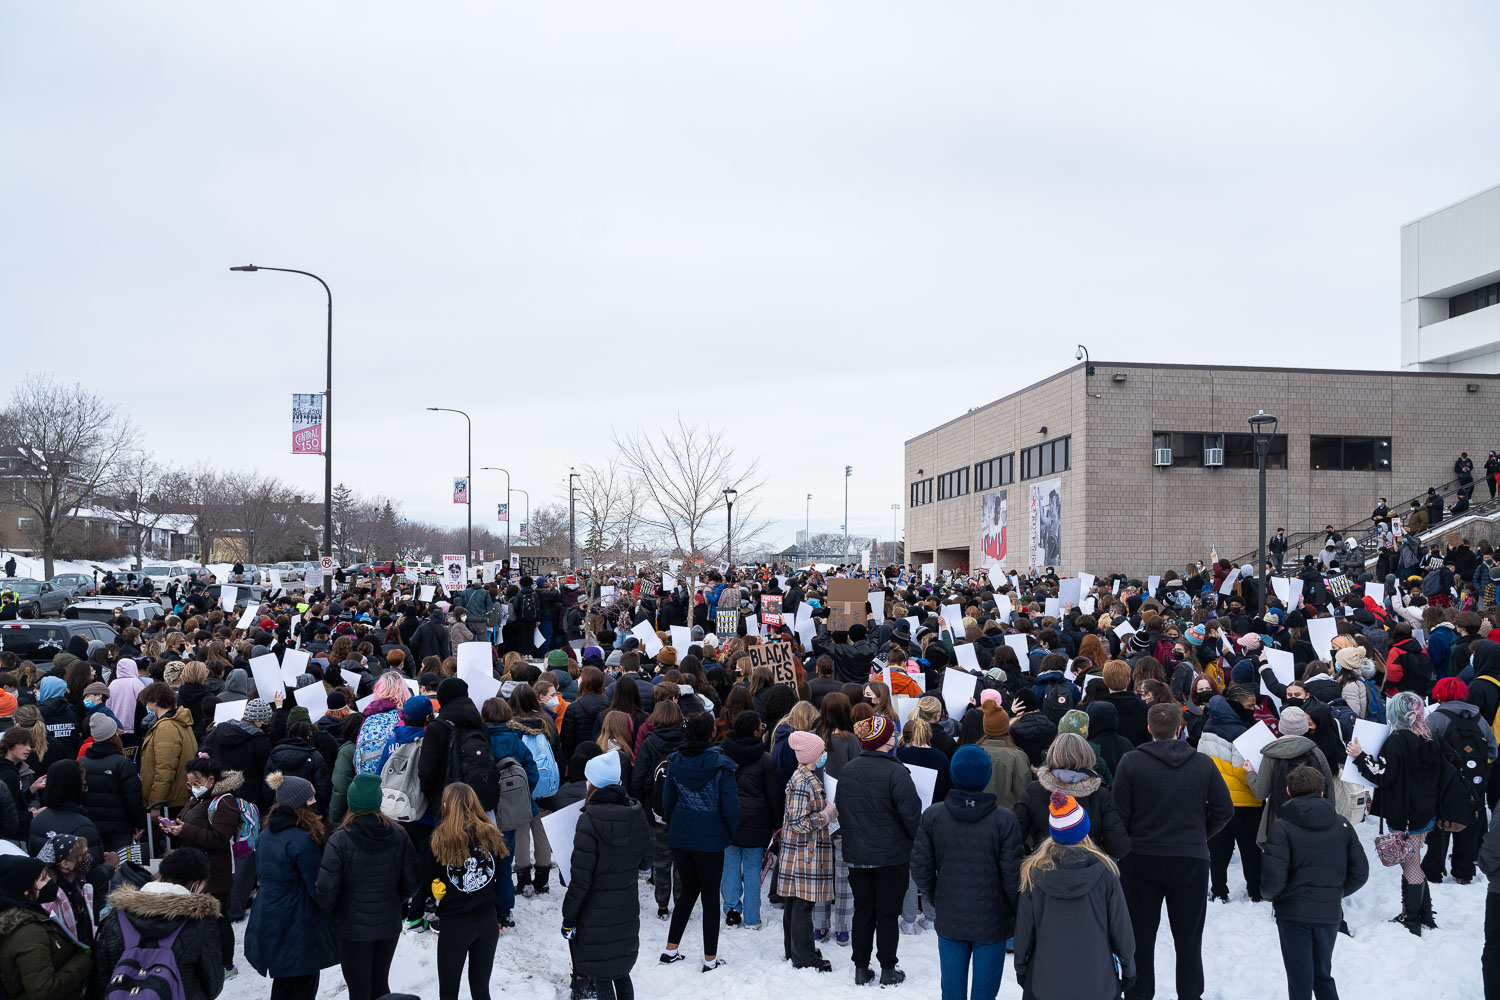 February 8, 2022 - St. Paul, Minn. -- High school students from aroudn the area march to the Minnesota Governor's Mansion demanding justice for Amir Locke.